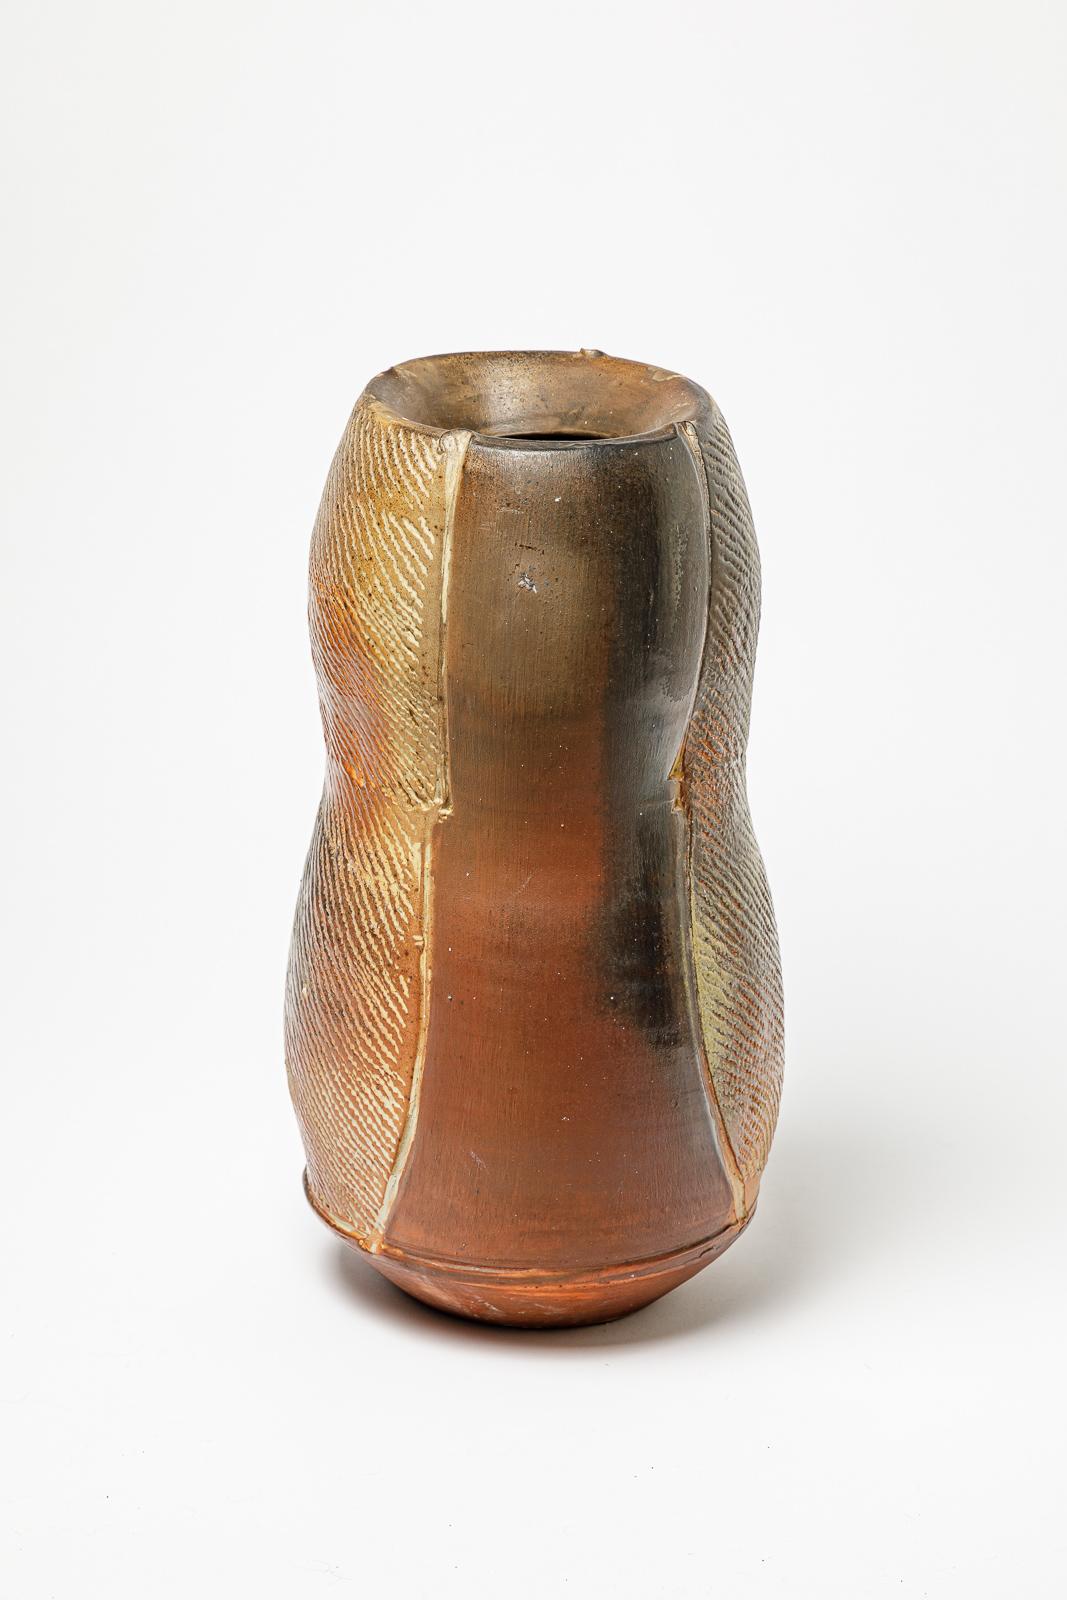 Beaux Arts Woodfired ceramic vase by Eric Astoul, circa 1990. For Sale